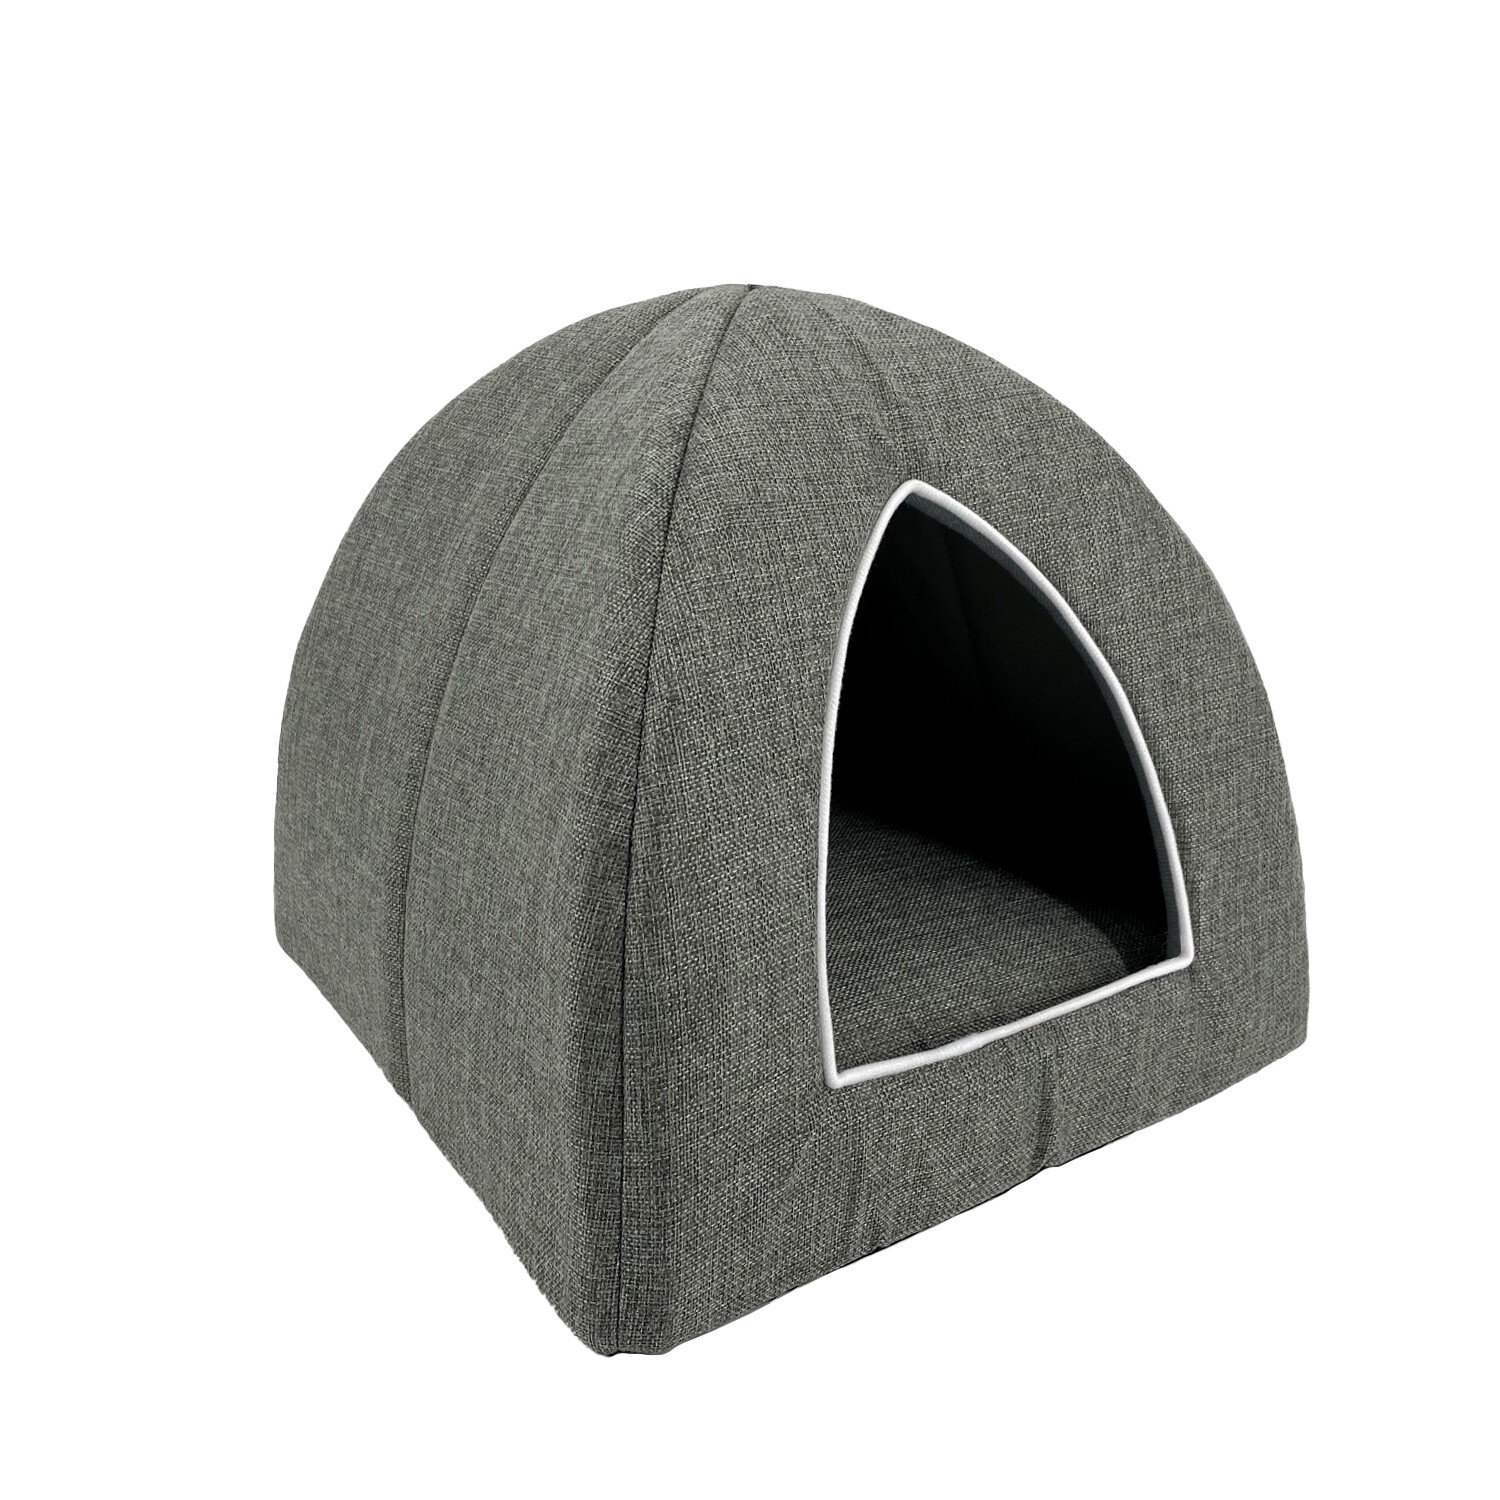 Clever Paws Grey Igloo Cat Bed Image 2